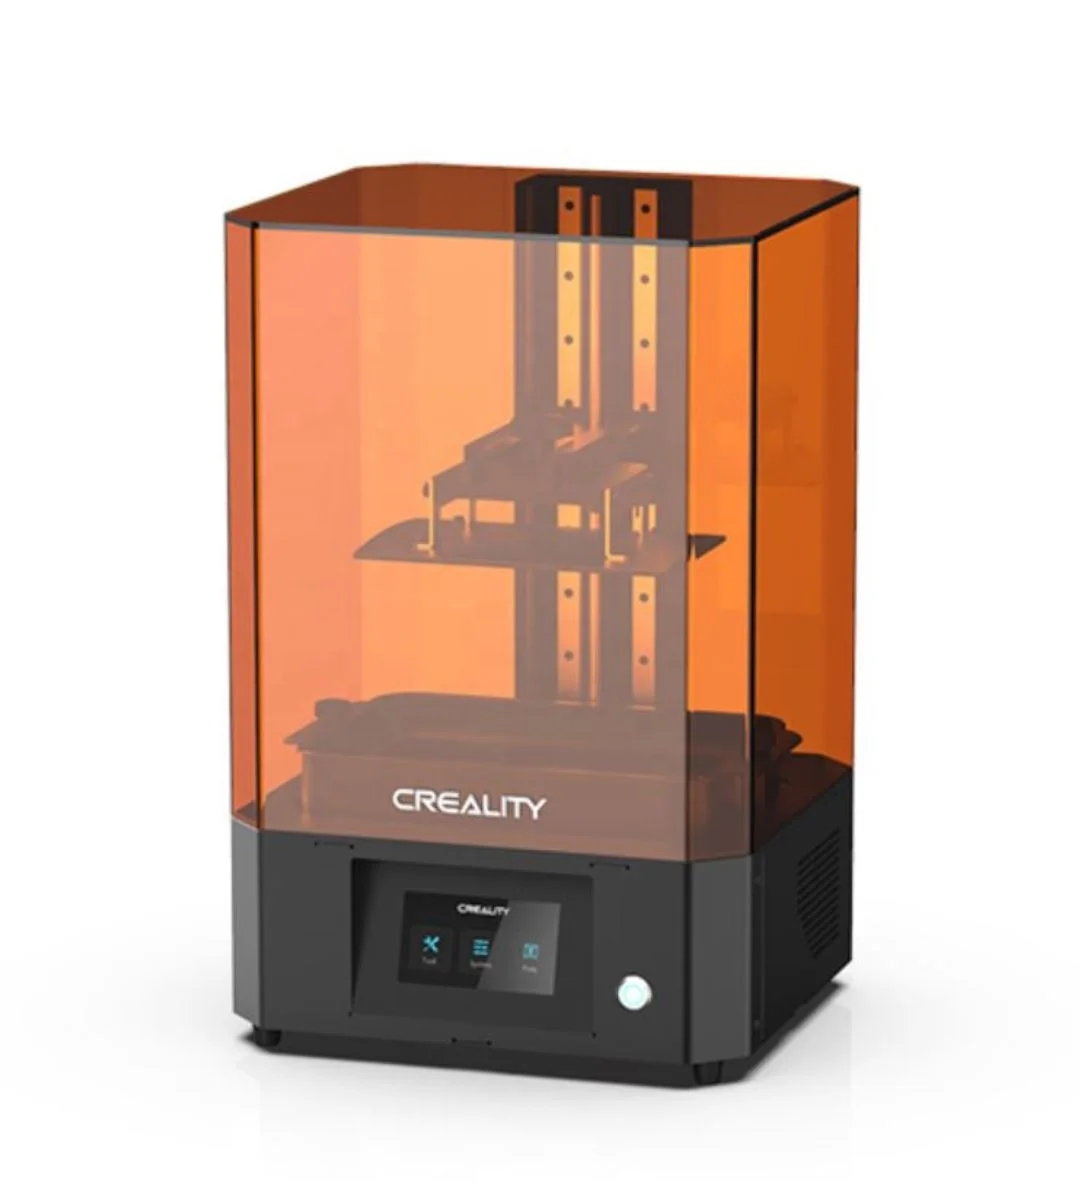 Labe klint Uforenelig Wholesale Creality LD-006 3D Printer SLA 3D printer 192*120*250mm creality  LD006 Resin 3D printer From m.alibaba.com